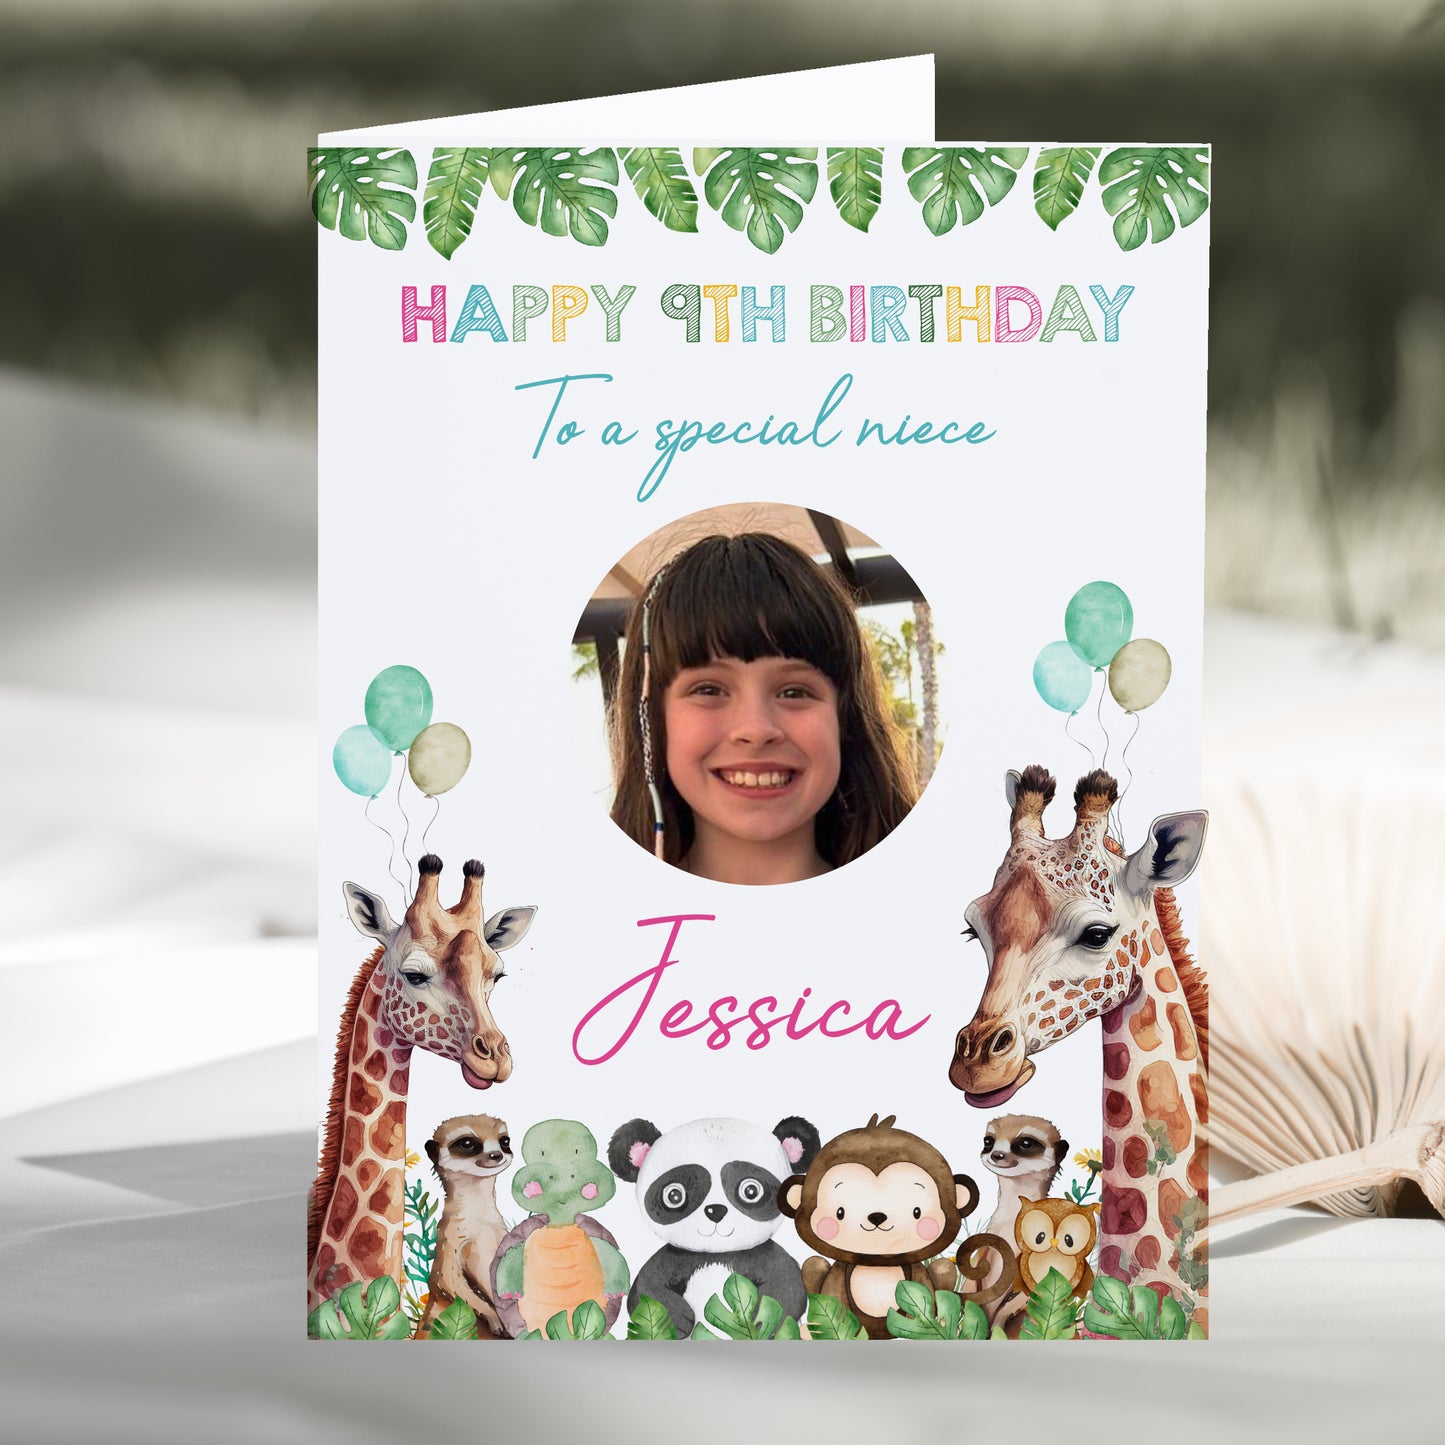 a birthday card with a picture of a giraffe and a monkey